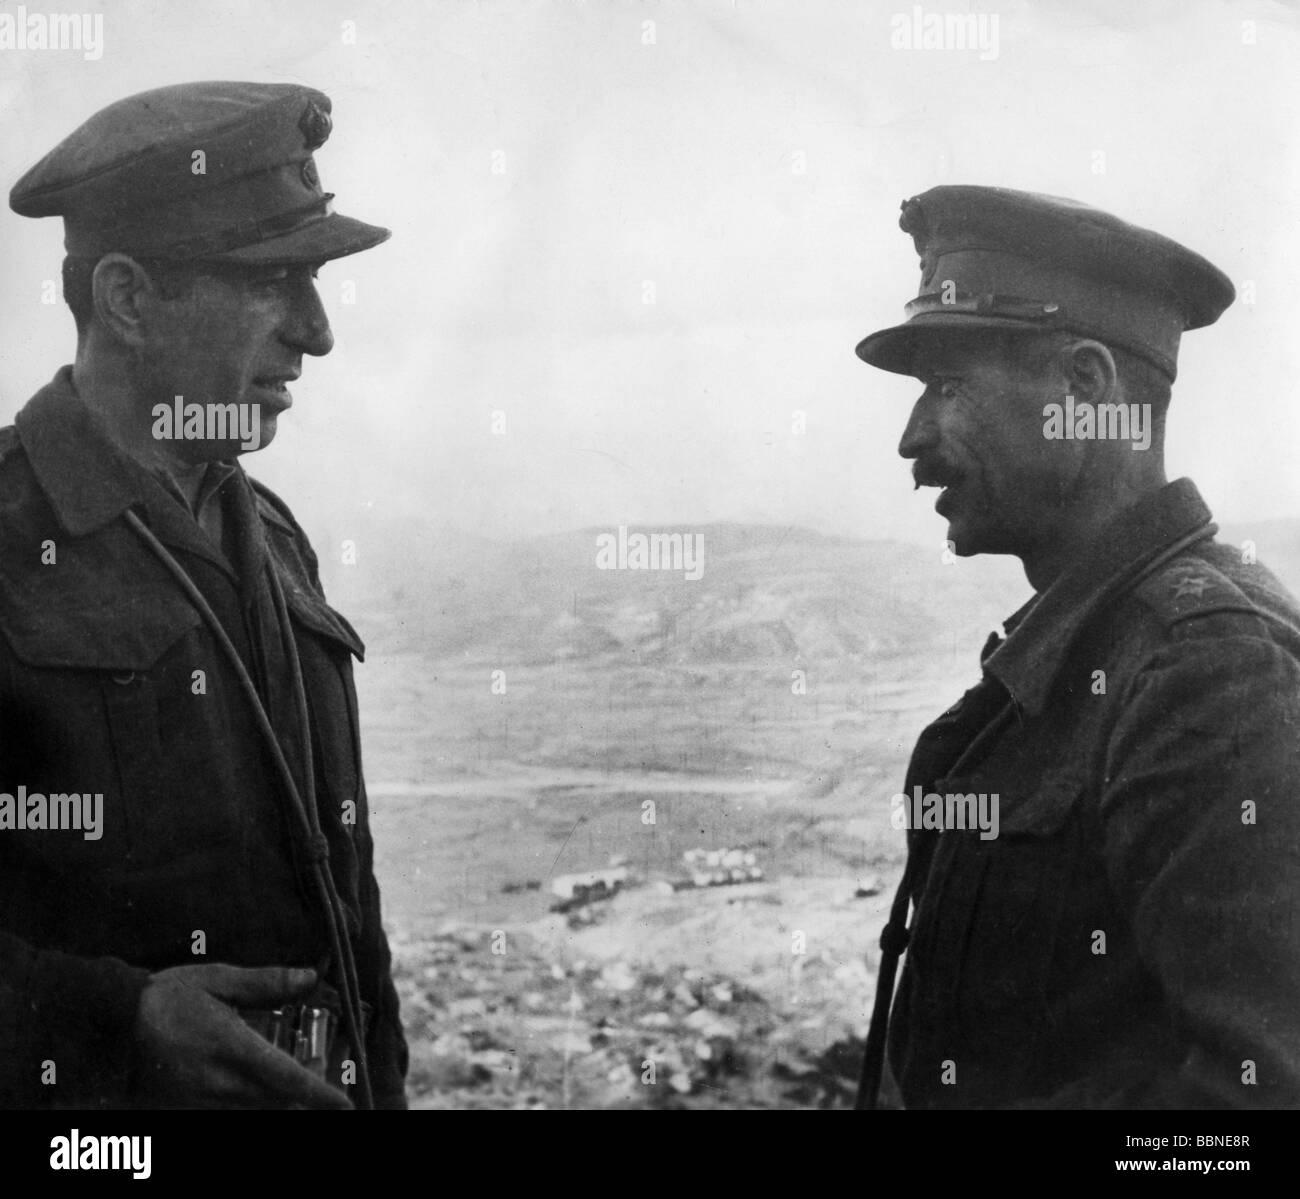 geography / travel, Greece, politics, Greek Civil War 1946 - 1949, two officers after the fightings at Konitsa, late 1947 / early 1948, 20th century, historic, historical, Europe, military, officer, Konica, uniform, uniforms, peaked cap, caps, Greek Army, battle, people, 1940s, Stock Photo